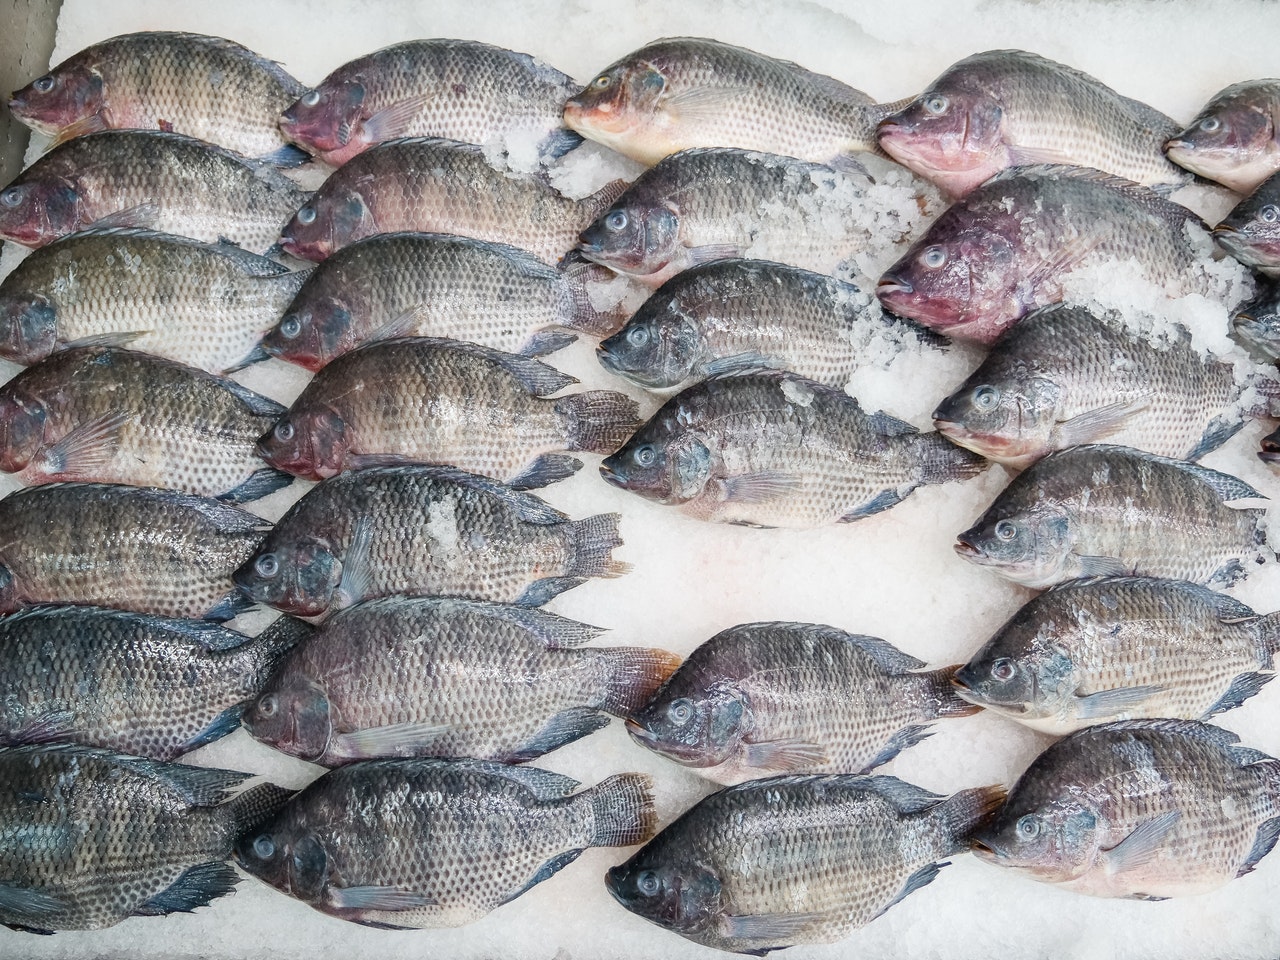 FishNet Alliance denounces the introduction of genetically improved tilapia in Nigeria